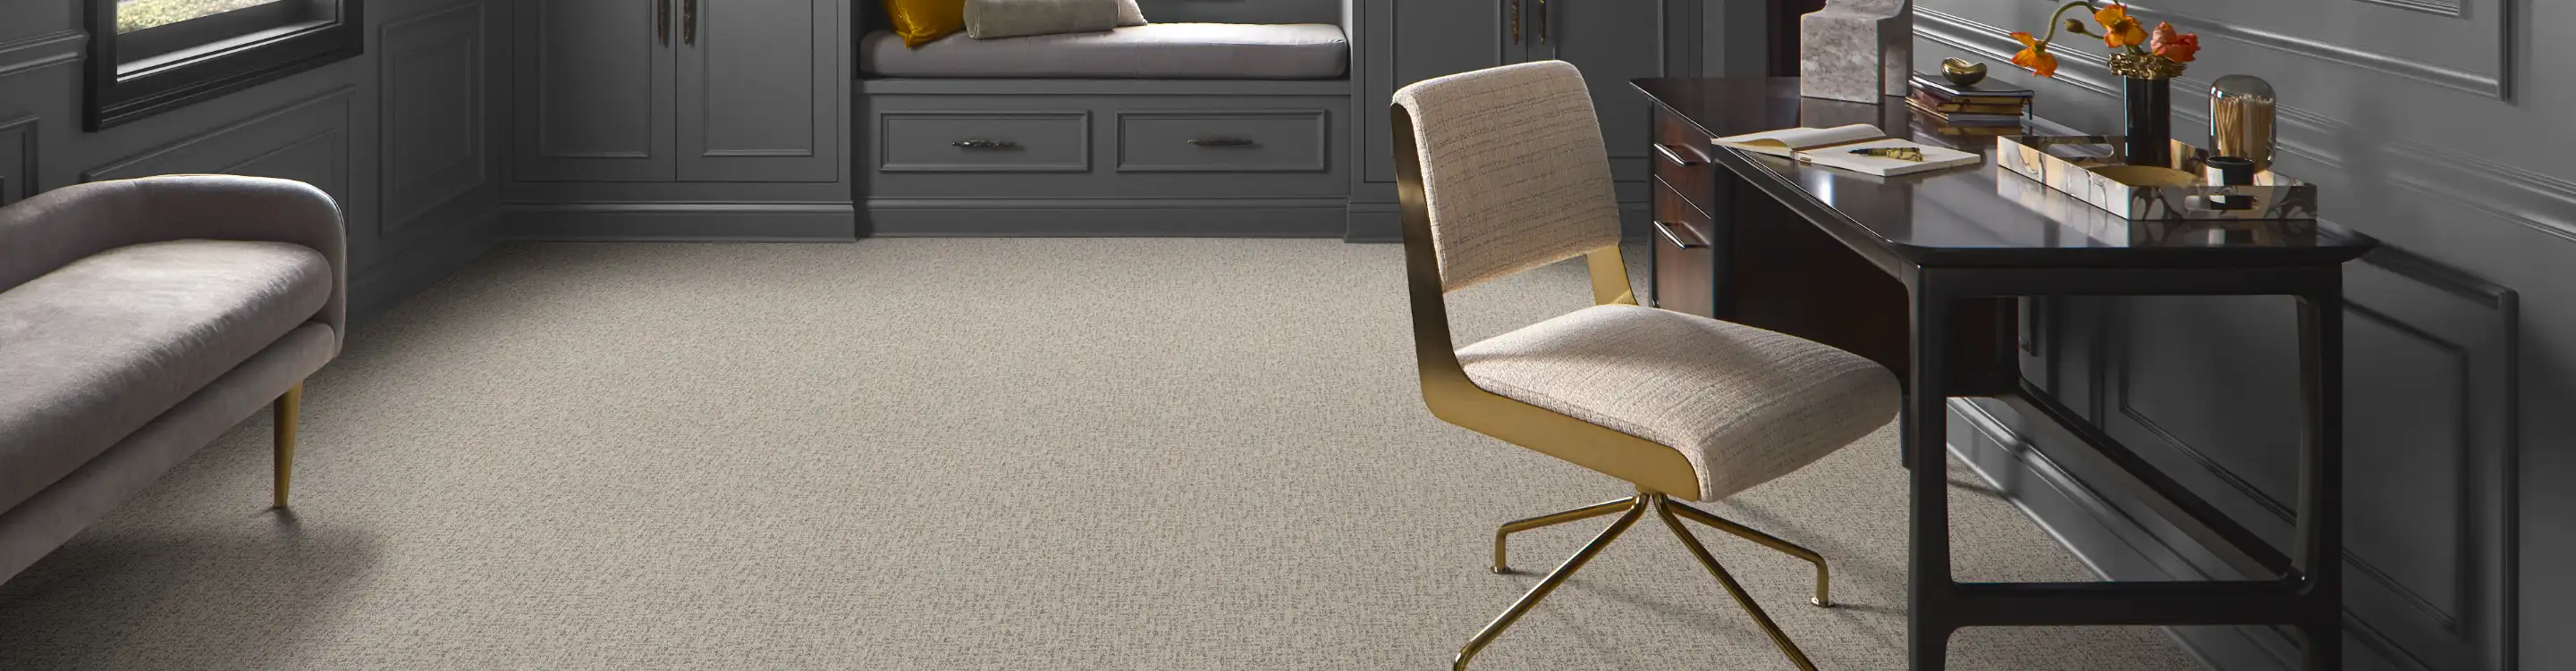 Carpet Padding Ers Guide How To Choose The Best For Your